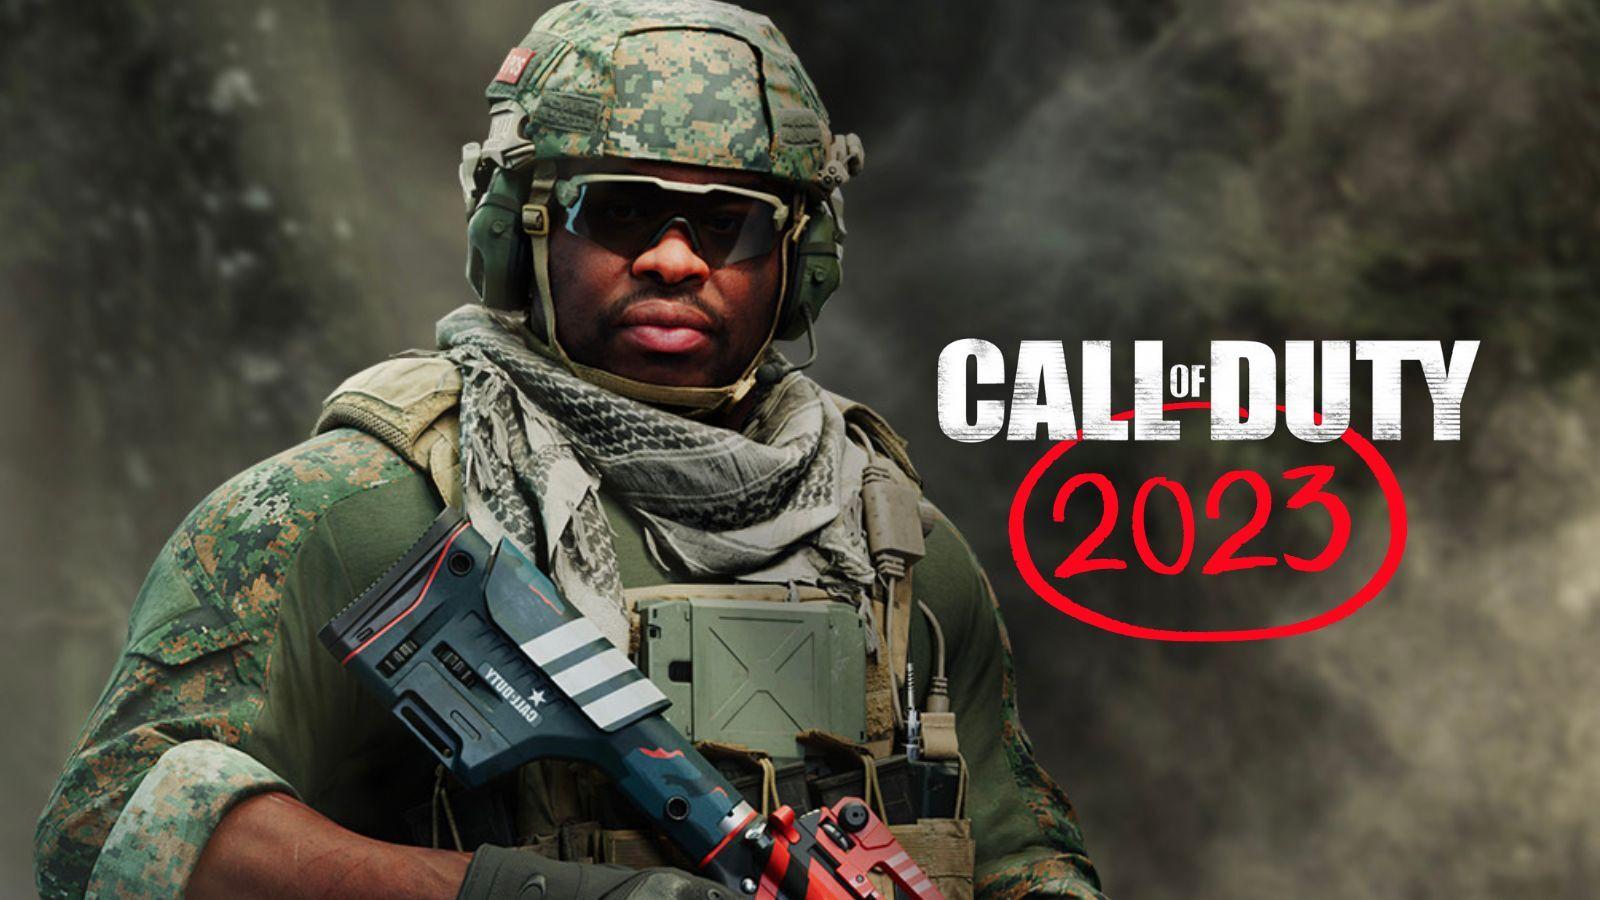 Call of Duty NEXT  Time to see what's in the NEXT Call of Duty